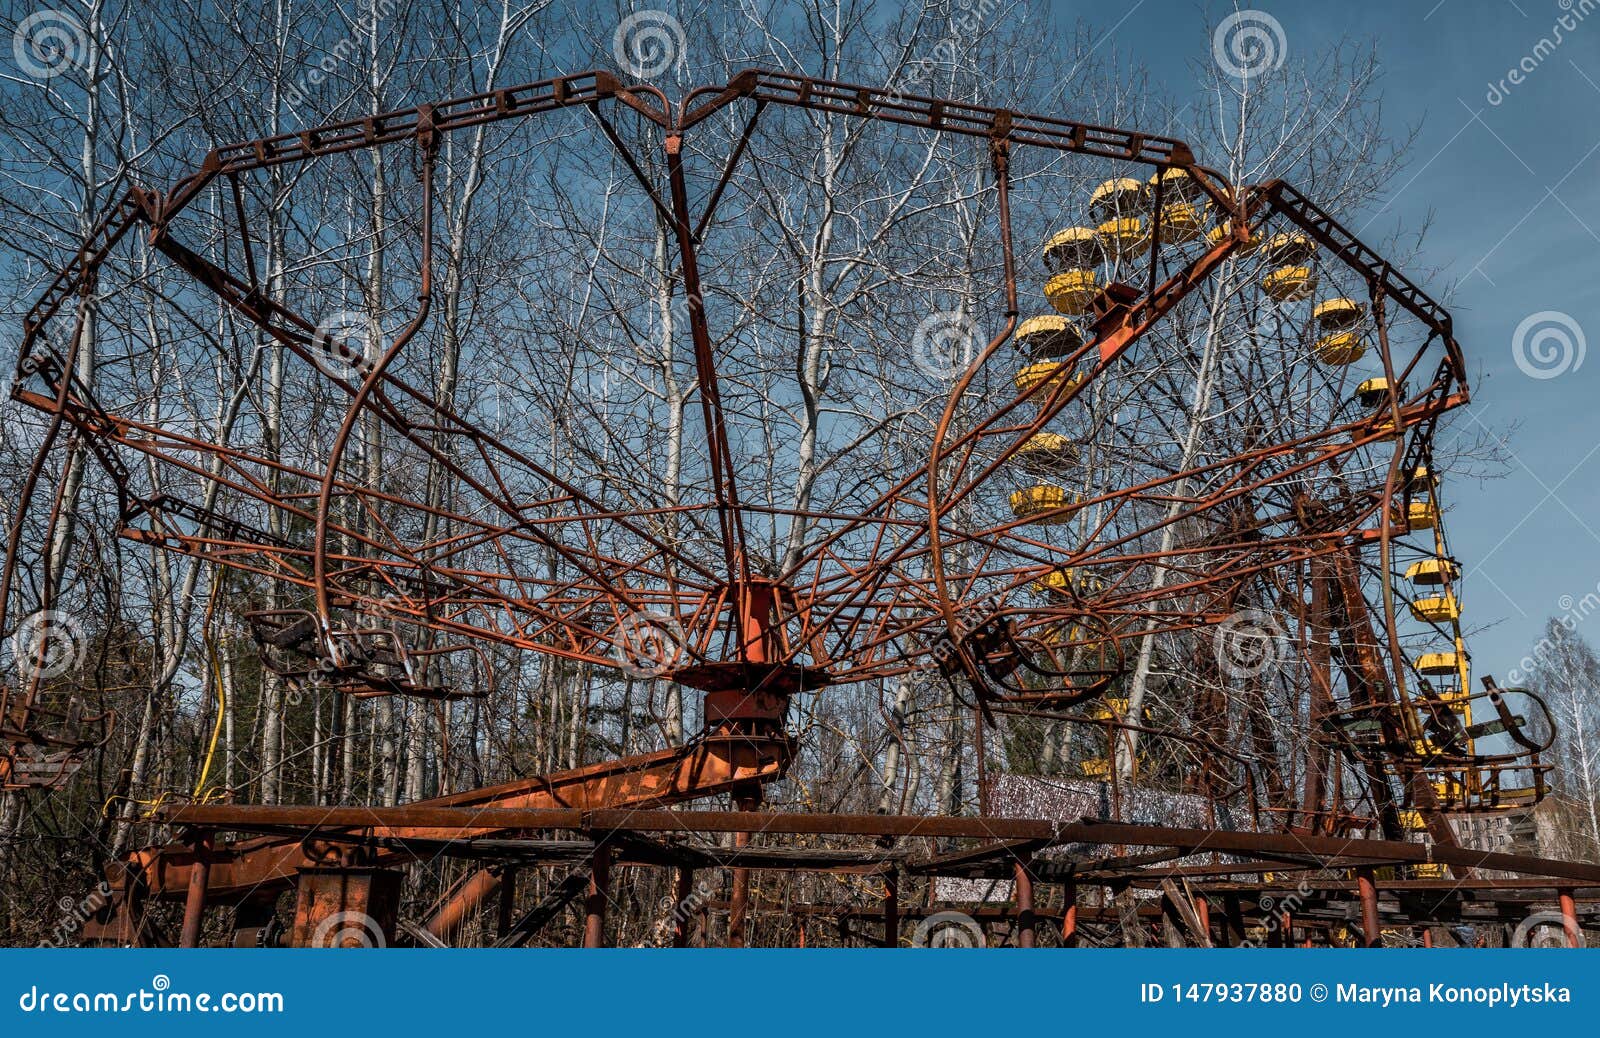 old ferris wheel in the ghost town of pripyat. consequences of the accident at the chernobil nuclear power plant